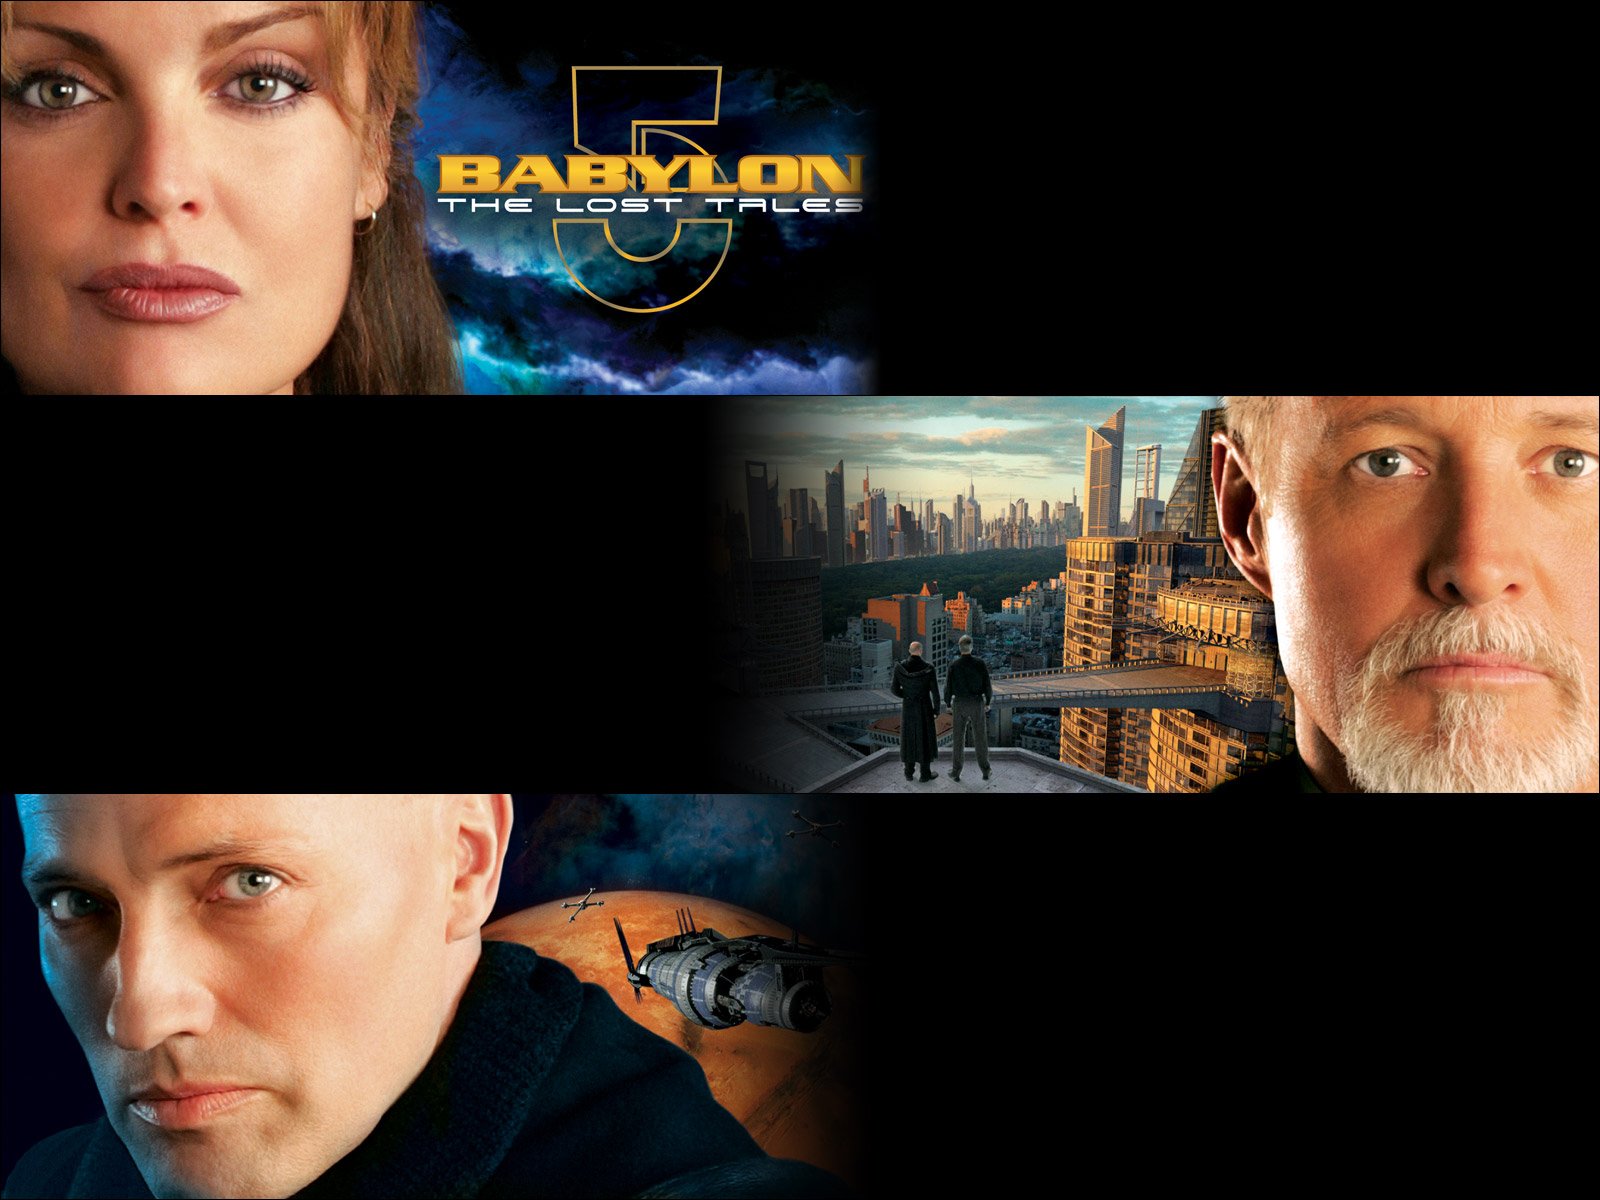 Babylon 5: The Lost Tales Wallpapers